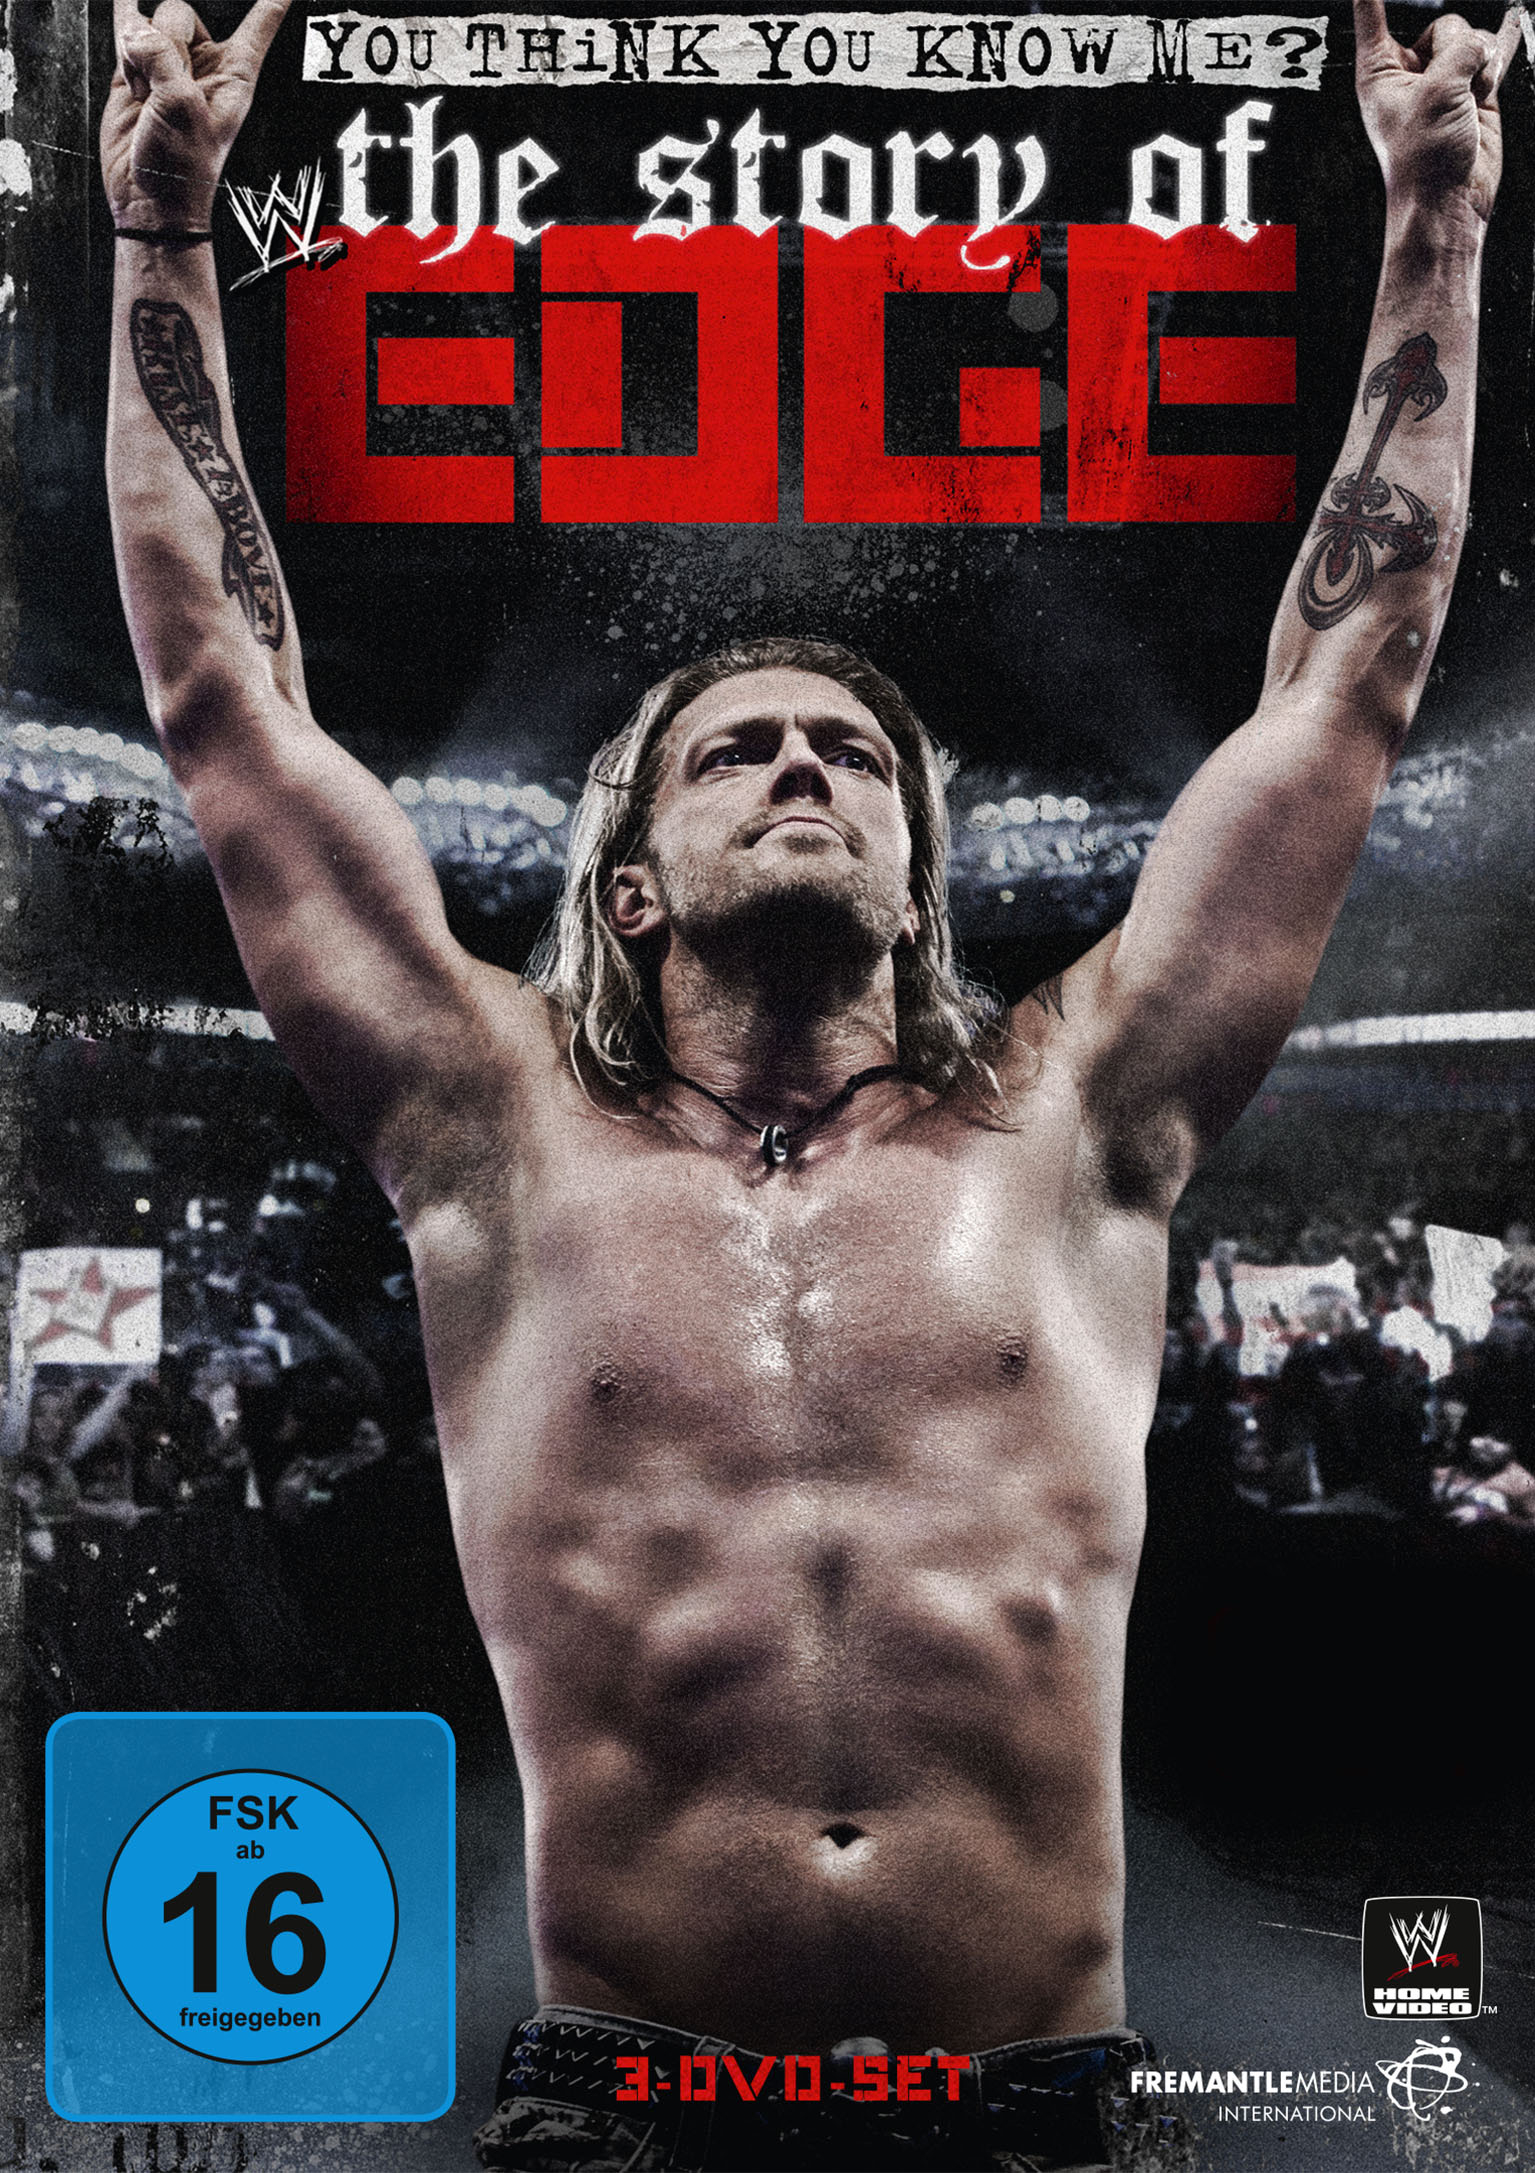 Story Think Edge Me? of Know You DVD The You WWE -